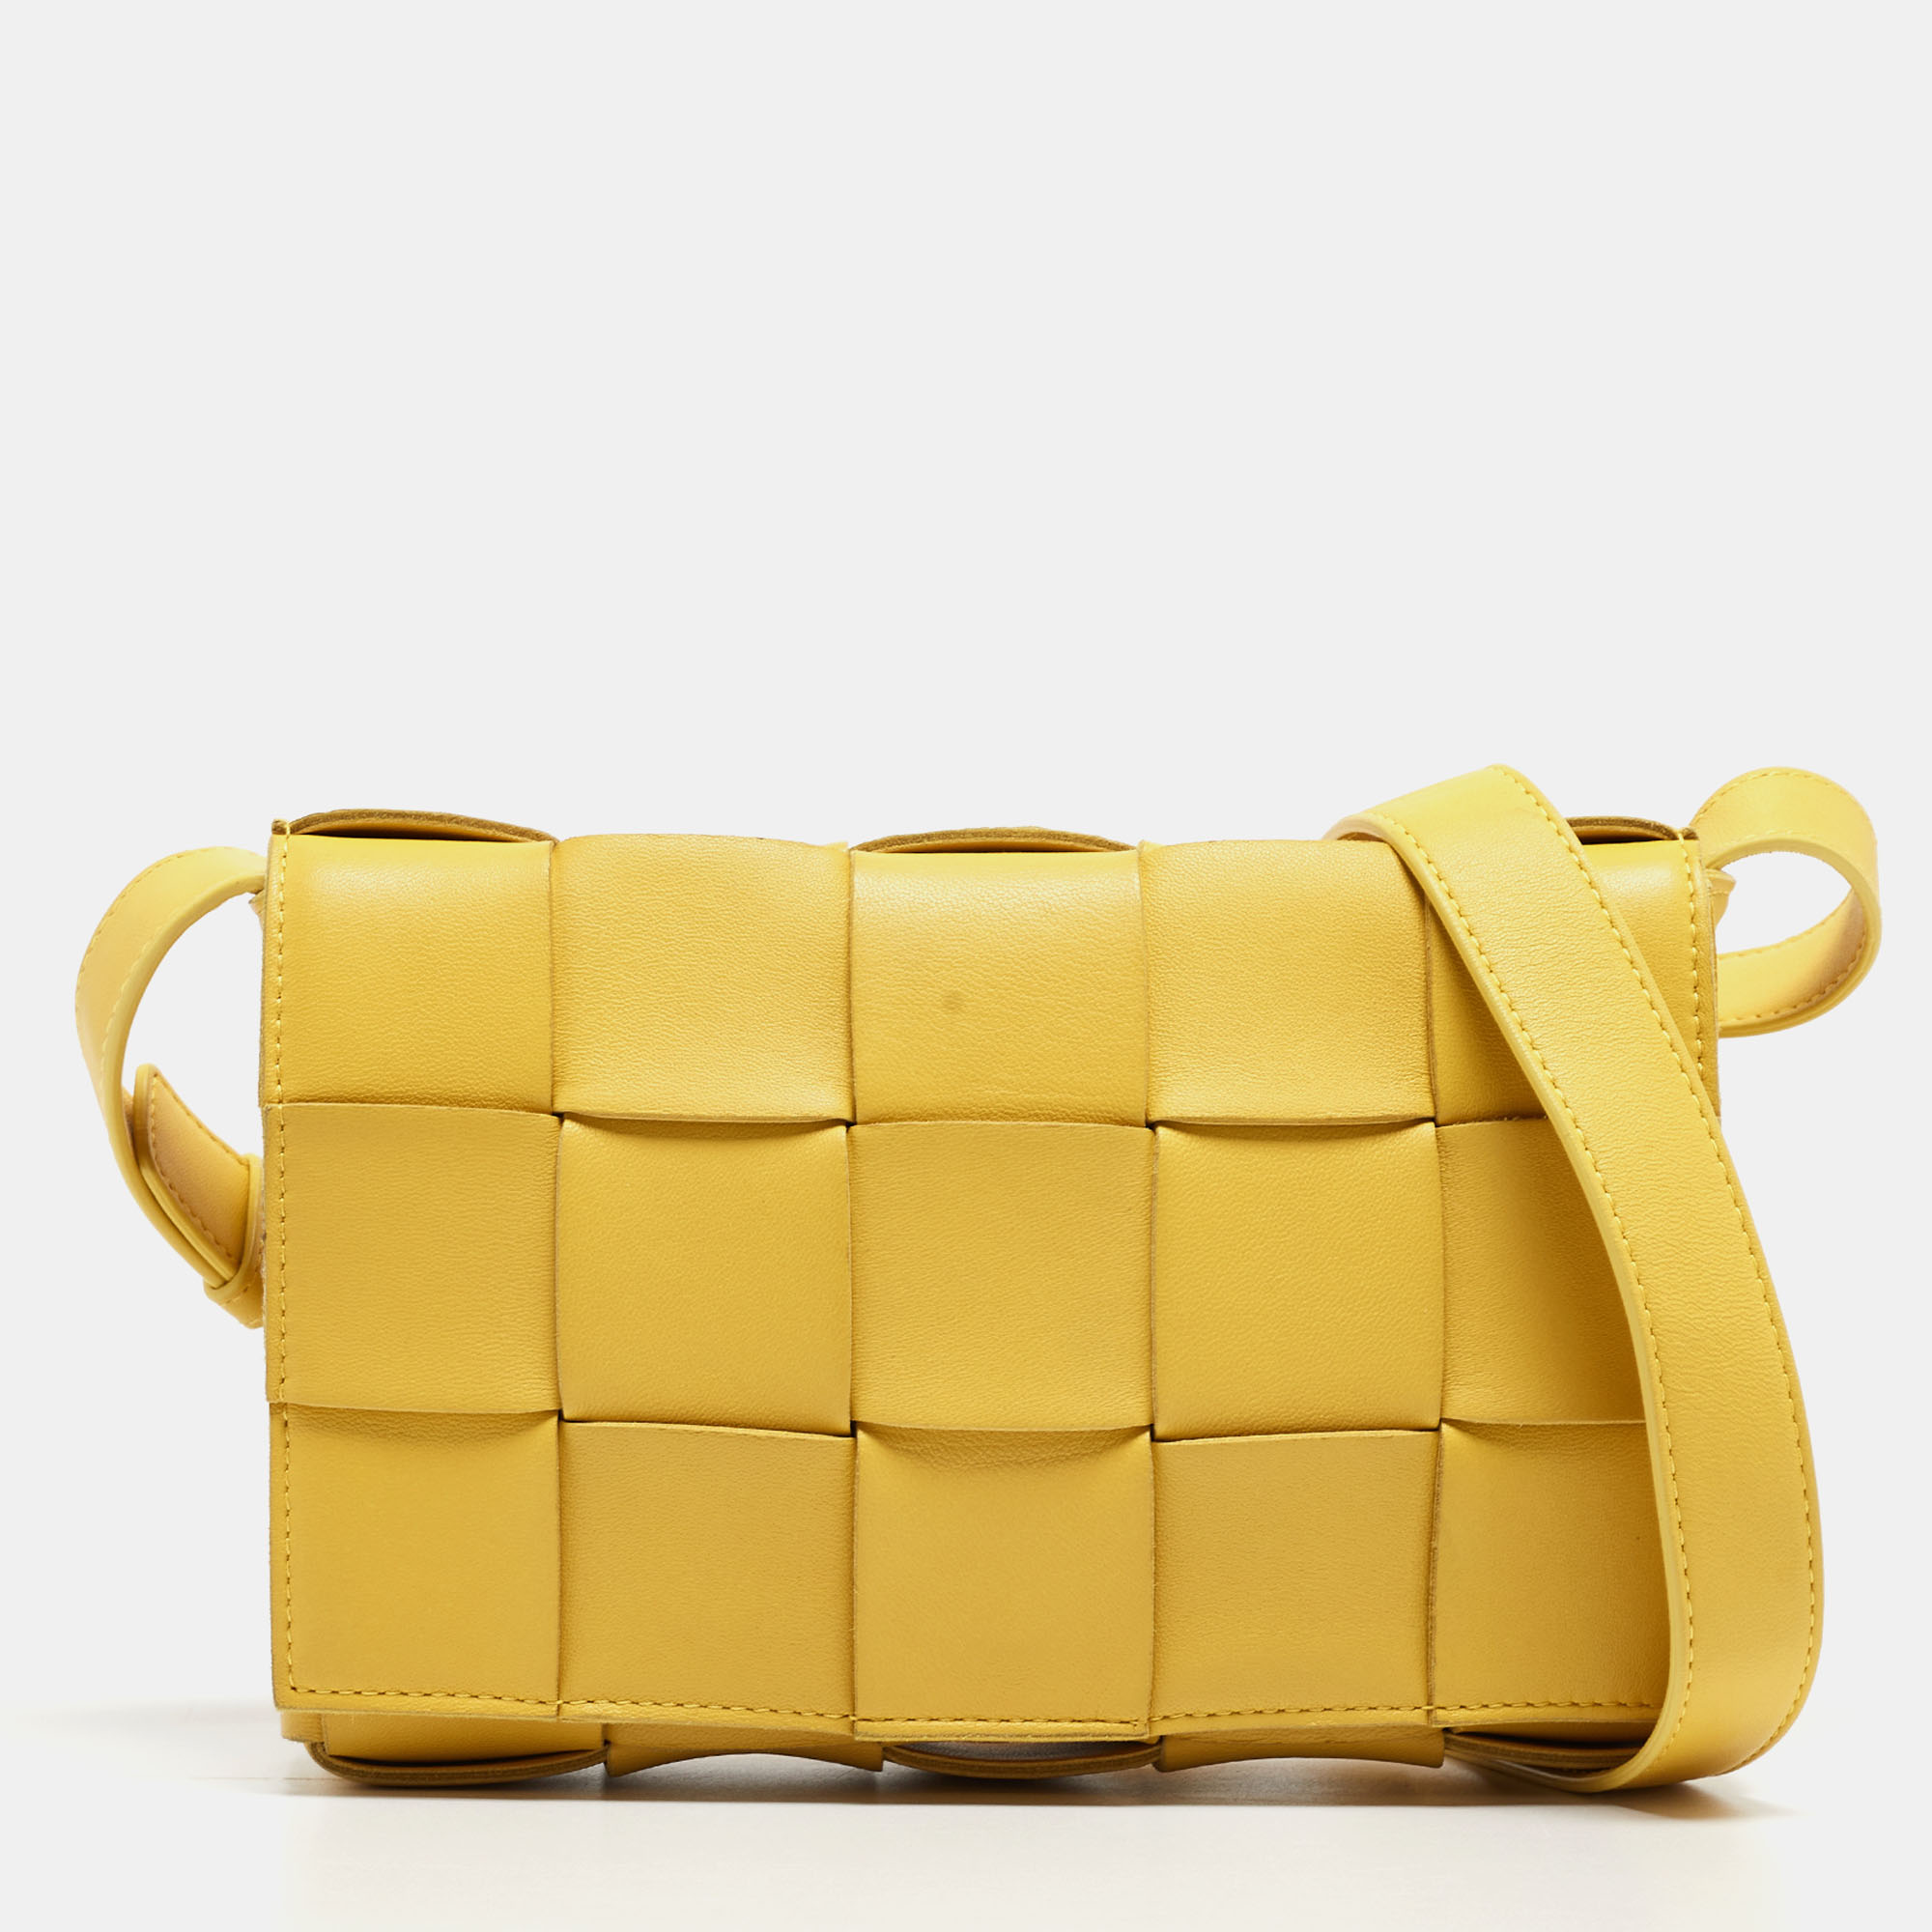 The Cassette bag by Bottega Veneta is all things stylish trendy and Instagram able. With its playful take on the brands signature house code the Intrecciato weave the bags exterior flaunts a maxi version of the weave. It is crafted from quality leather in a lovely shade of yellow. The front flap opens gracefully to a leather interior sized perfectly to carry your essentials. The bag is impeccably finished with gold tone hardware.